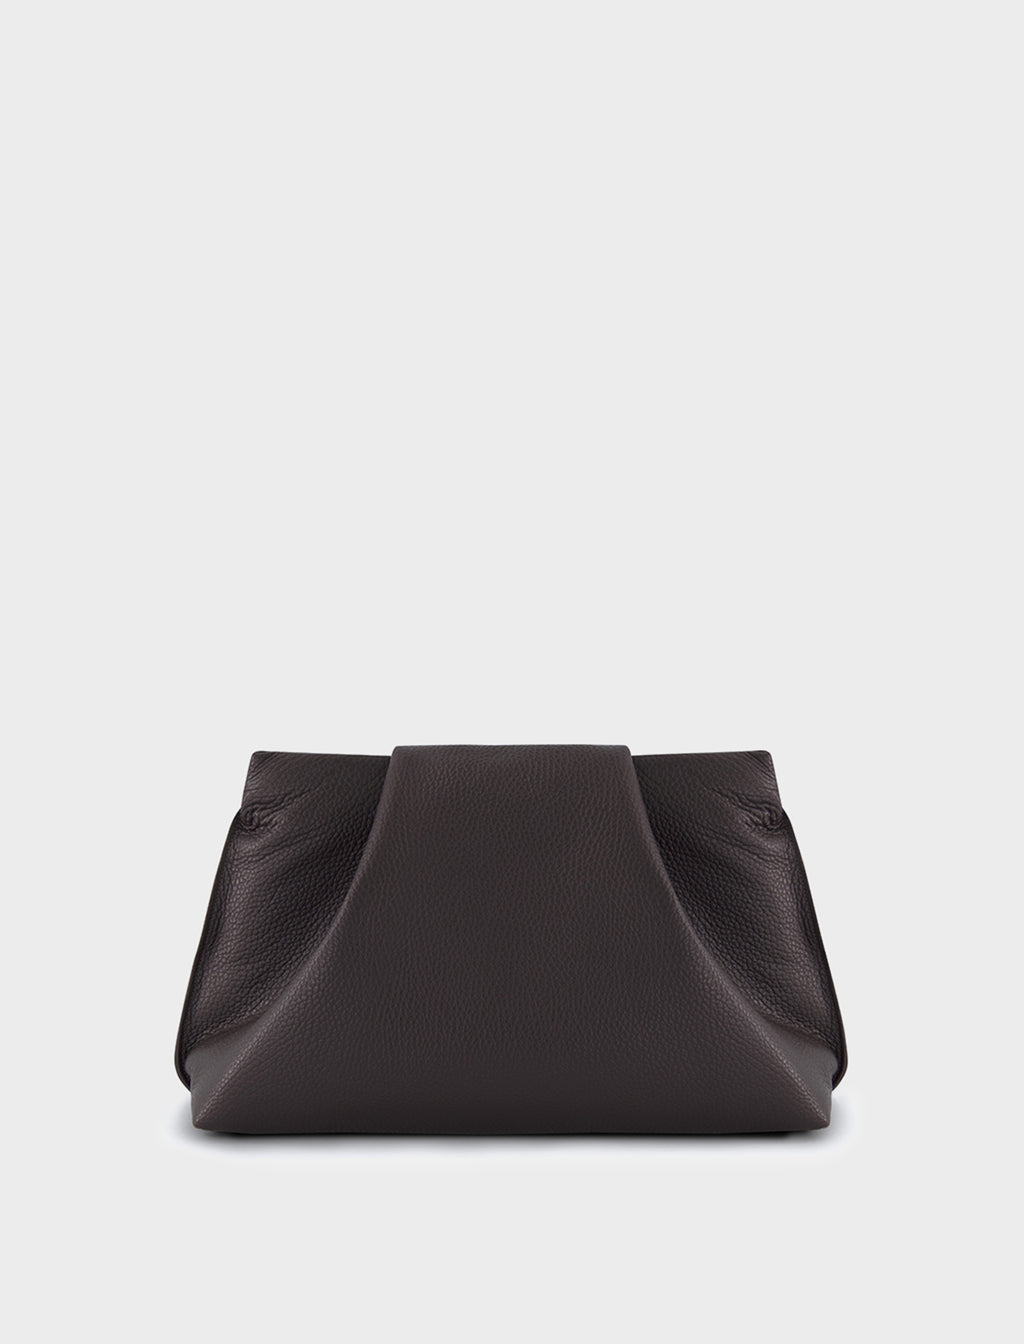 Buy Bagsy Malone Brown Purse Clutch - Clutches for Women 16365764 | Myntra